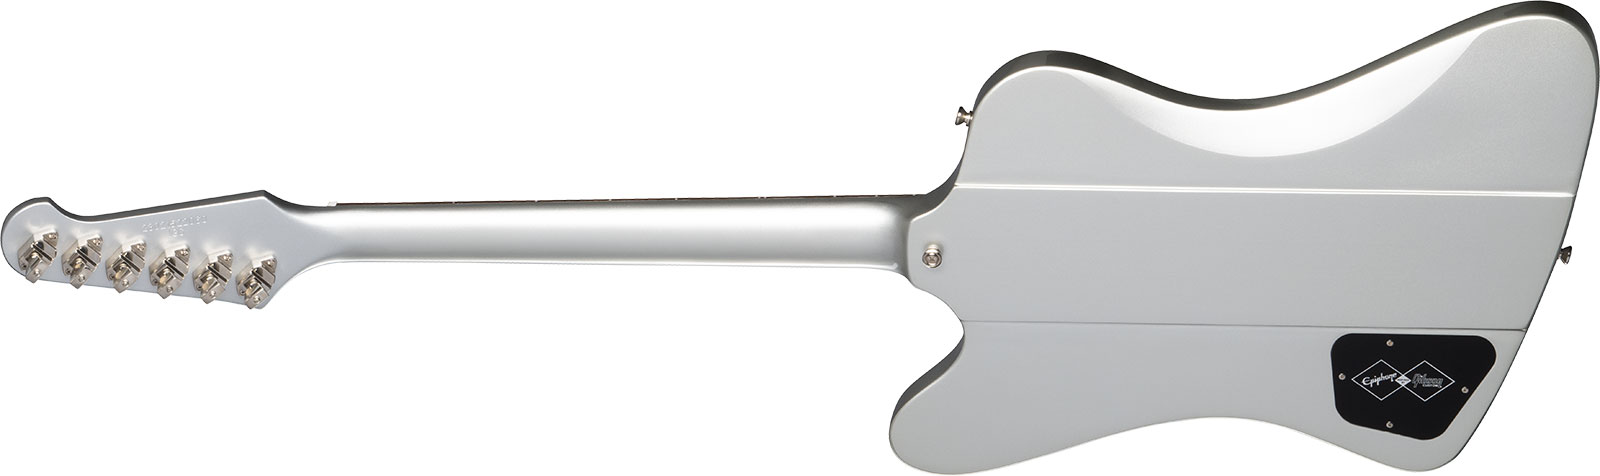 Epiphone Firebird I 1963 Inspired By Gibson Custom 1mh Ht Lau - Silver Mist - Guitare Électrique RÉtro Rock - Variation 1